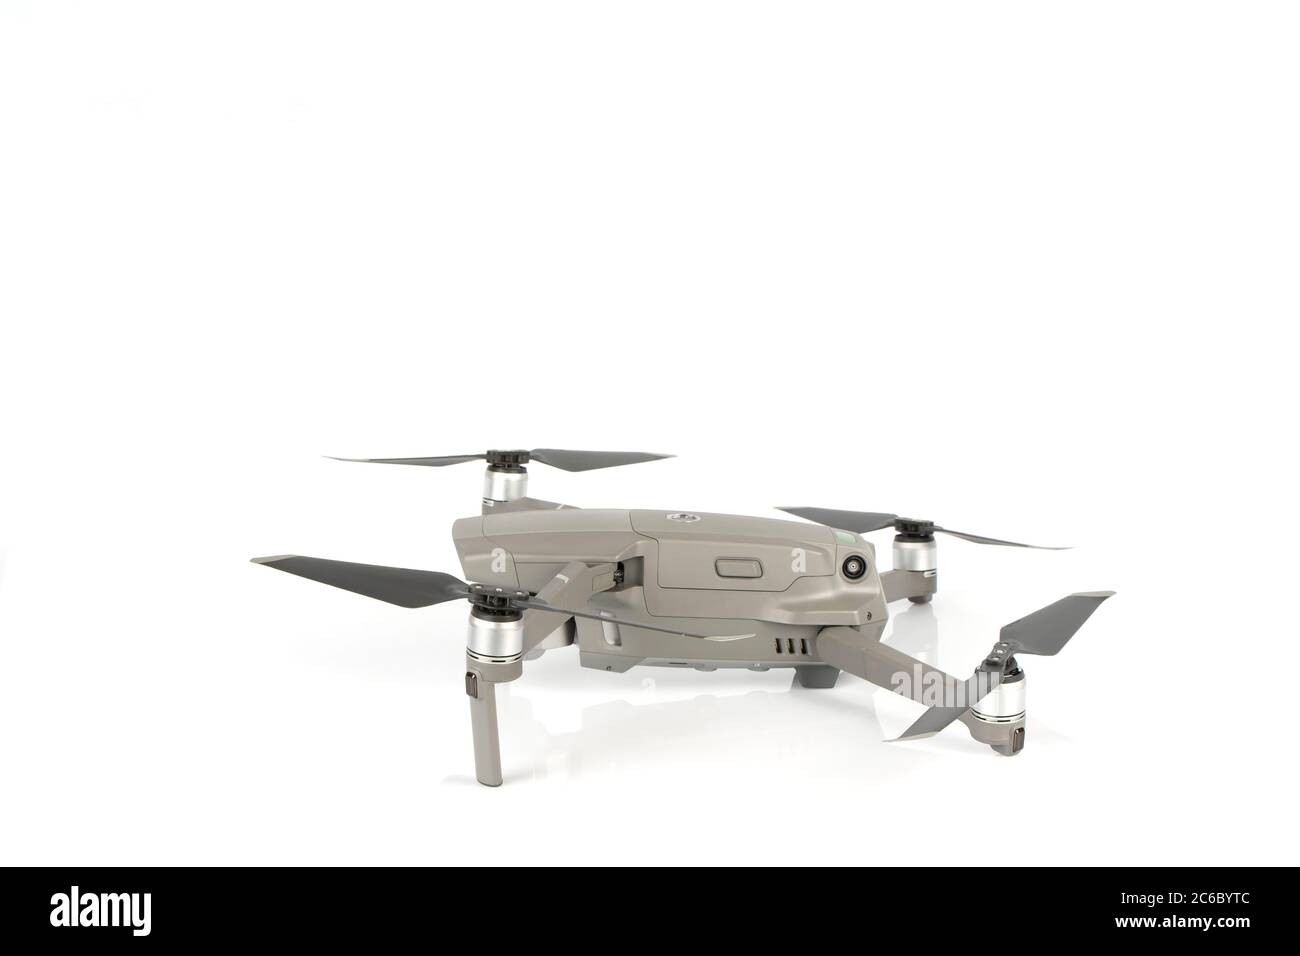 DJI Mavic 2 Pro drone isolated on white. Photograph taken on July 7, 2020 in Spain. Stock Photo